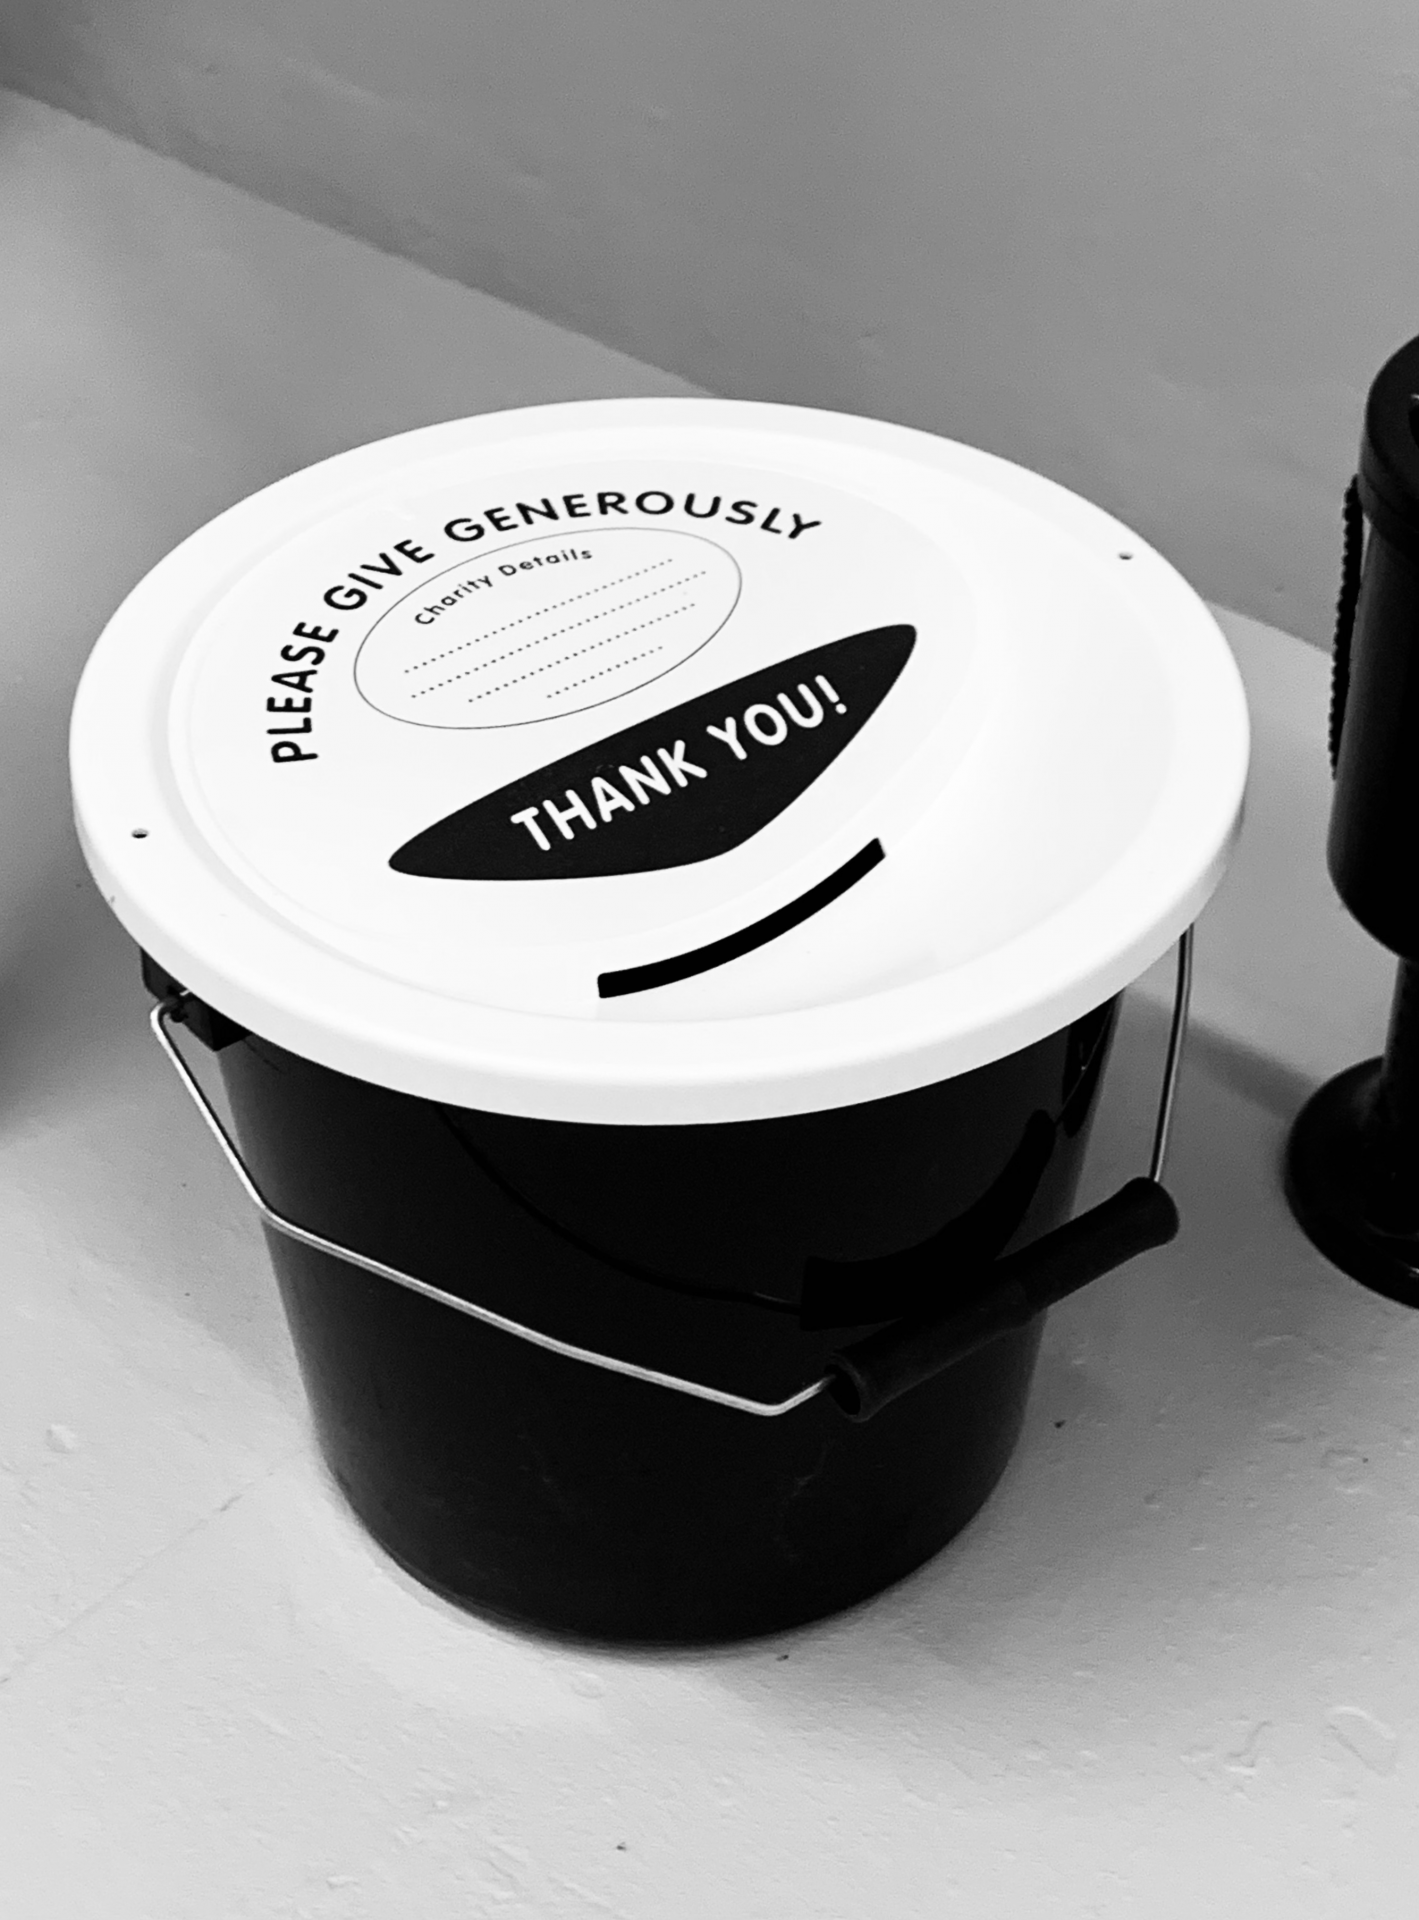 A photo of a black charity donations bucket.